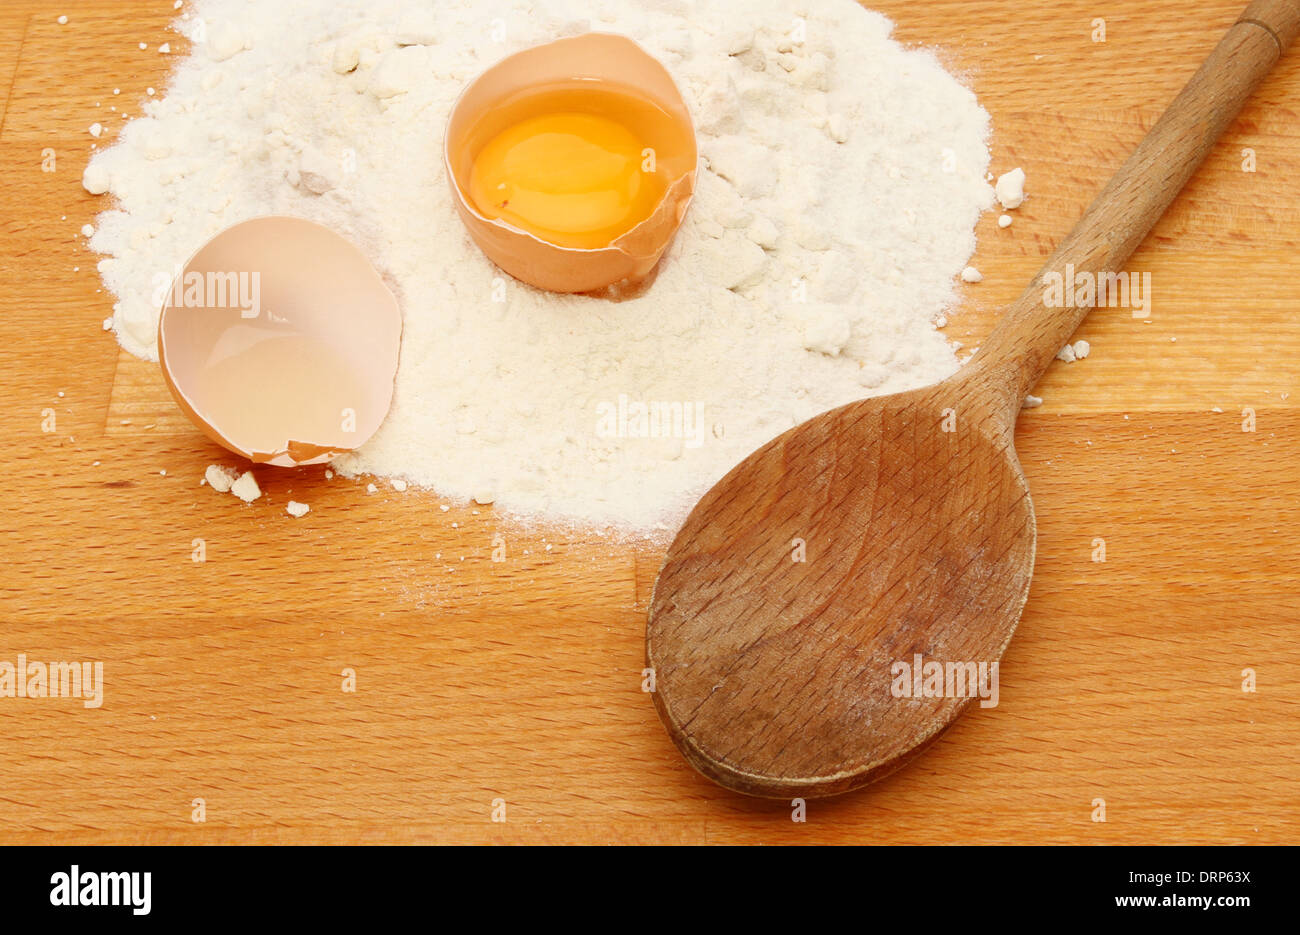 Flour, egg and a wooden spoon on a wooden kitchen worktop Stock Photo